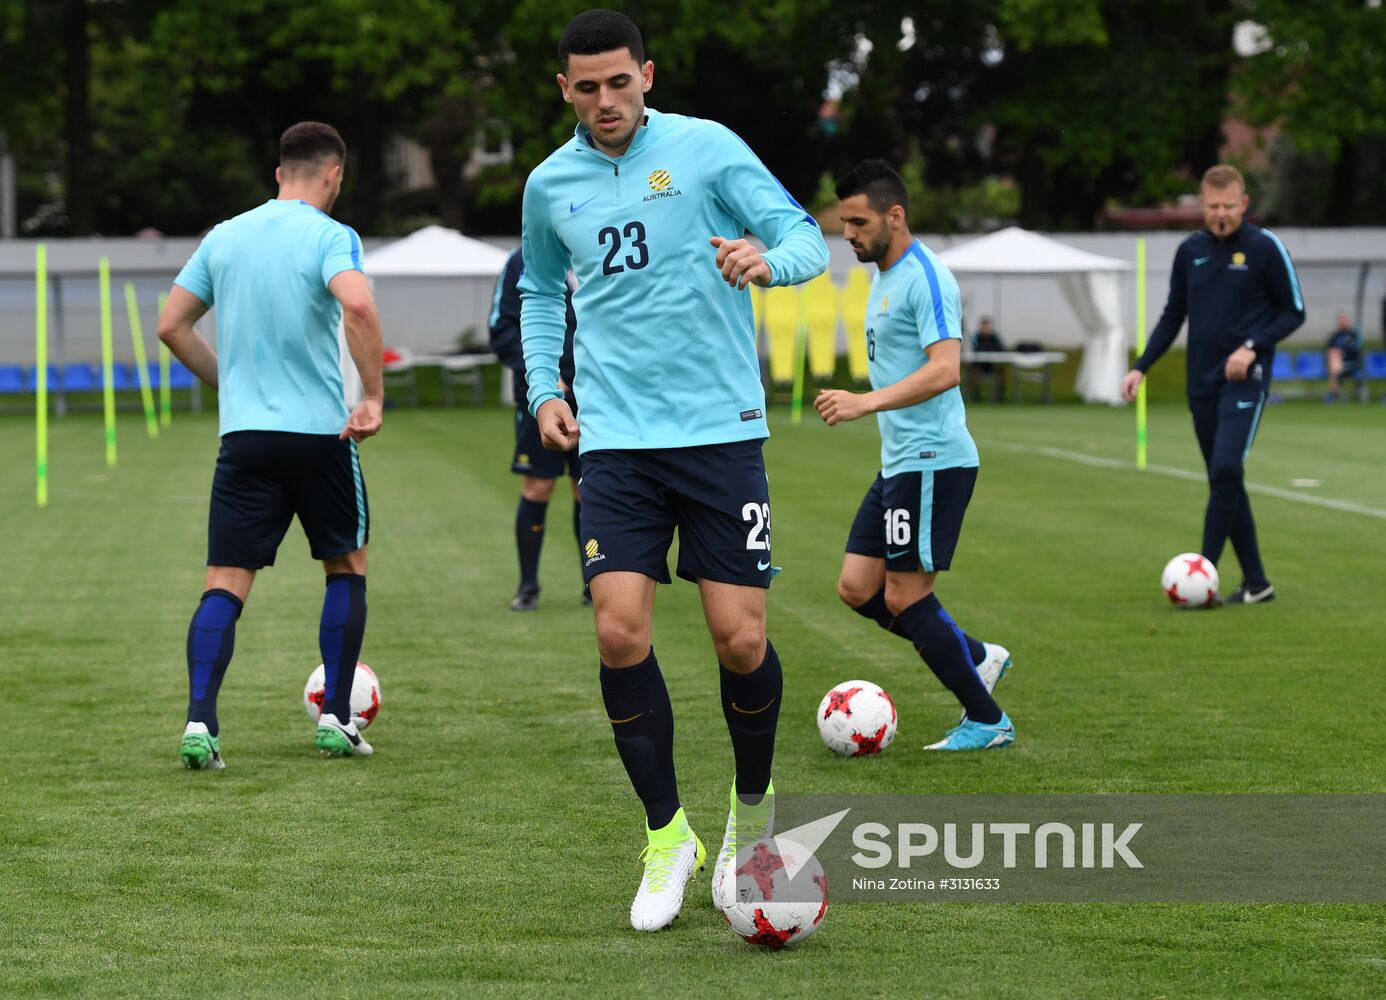 2017 Confederations Cup. Australian team holds training session